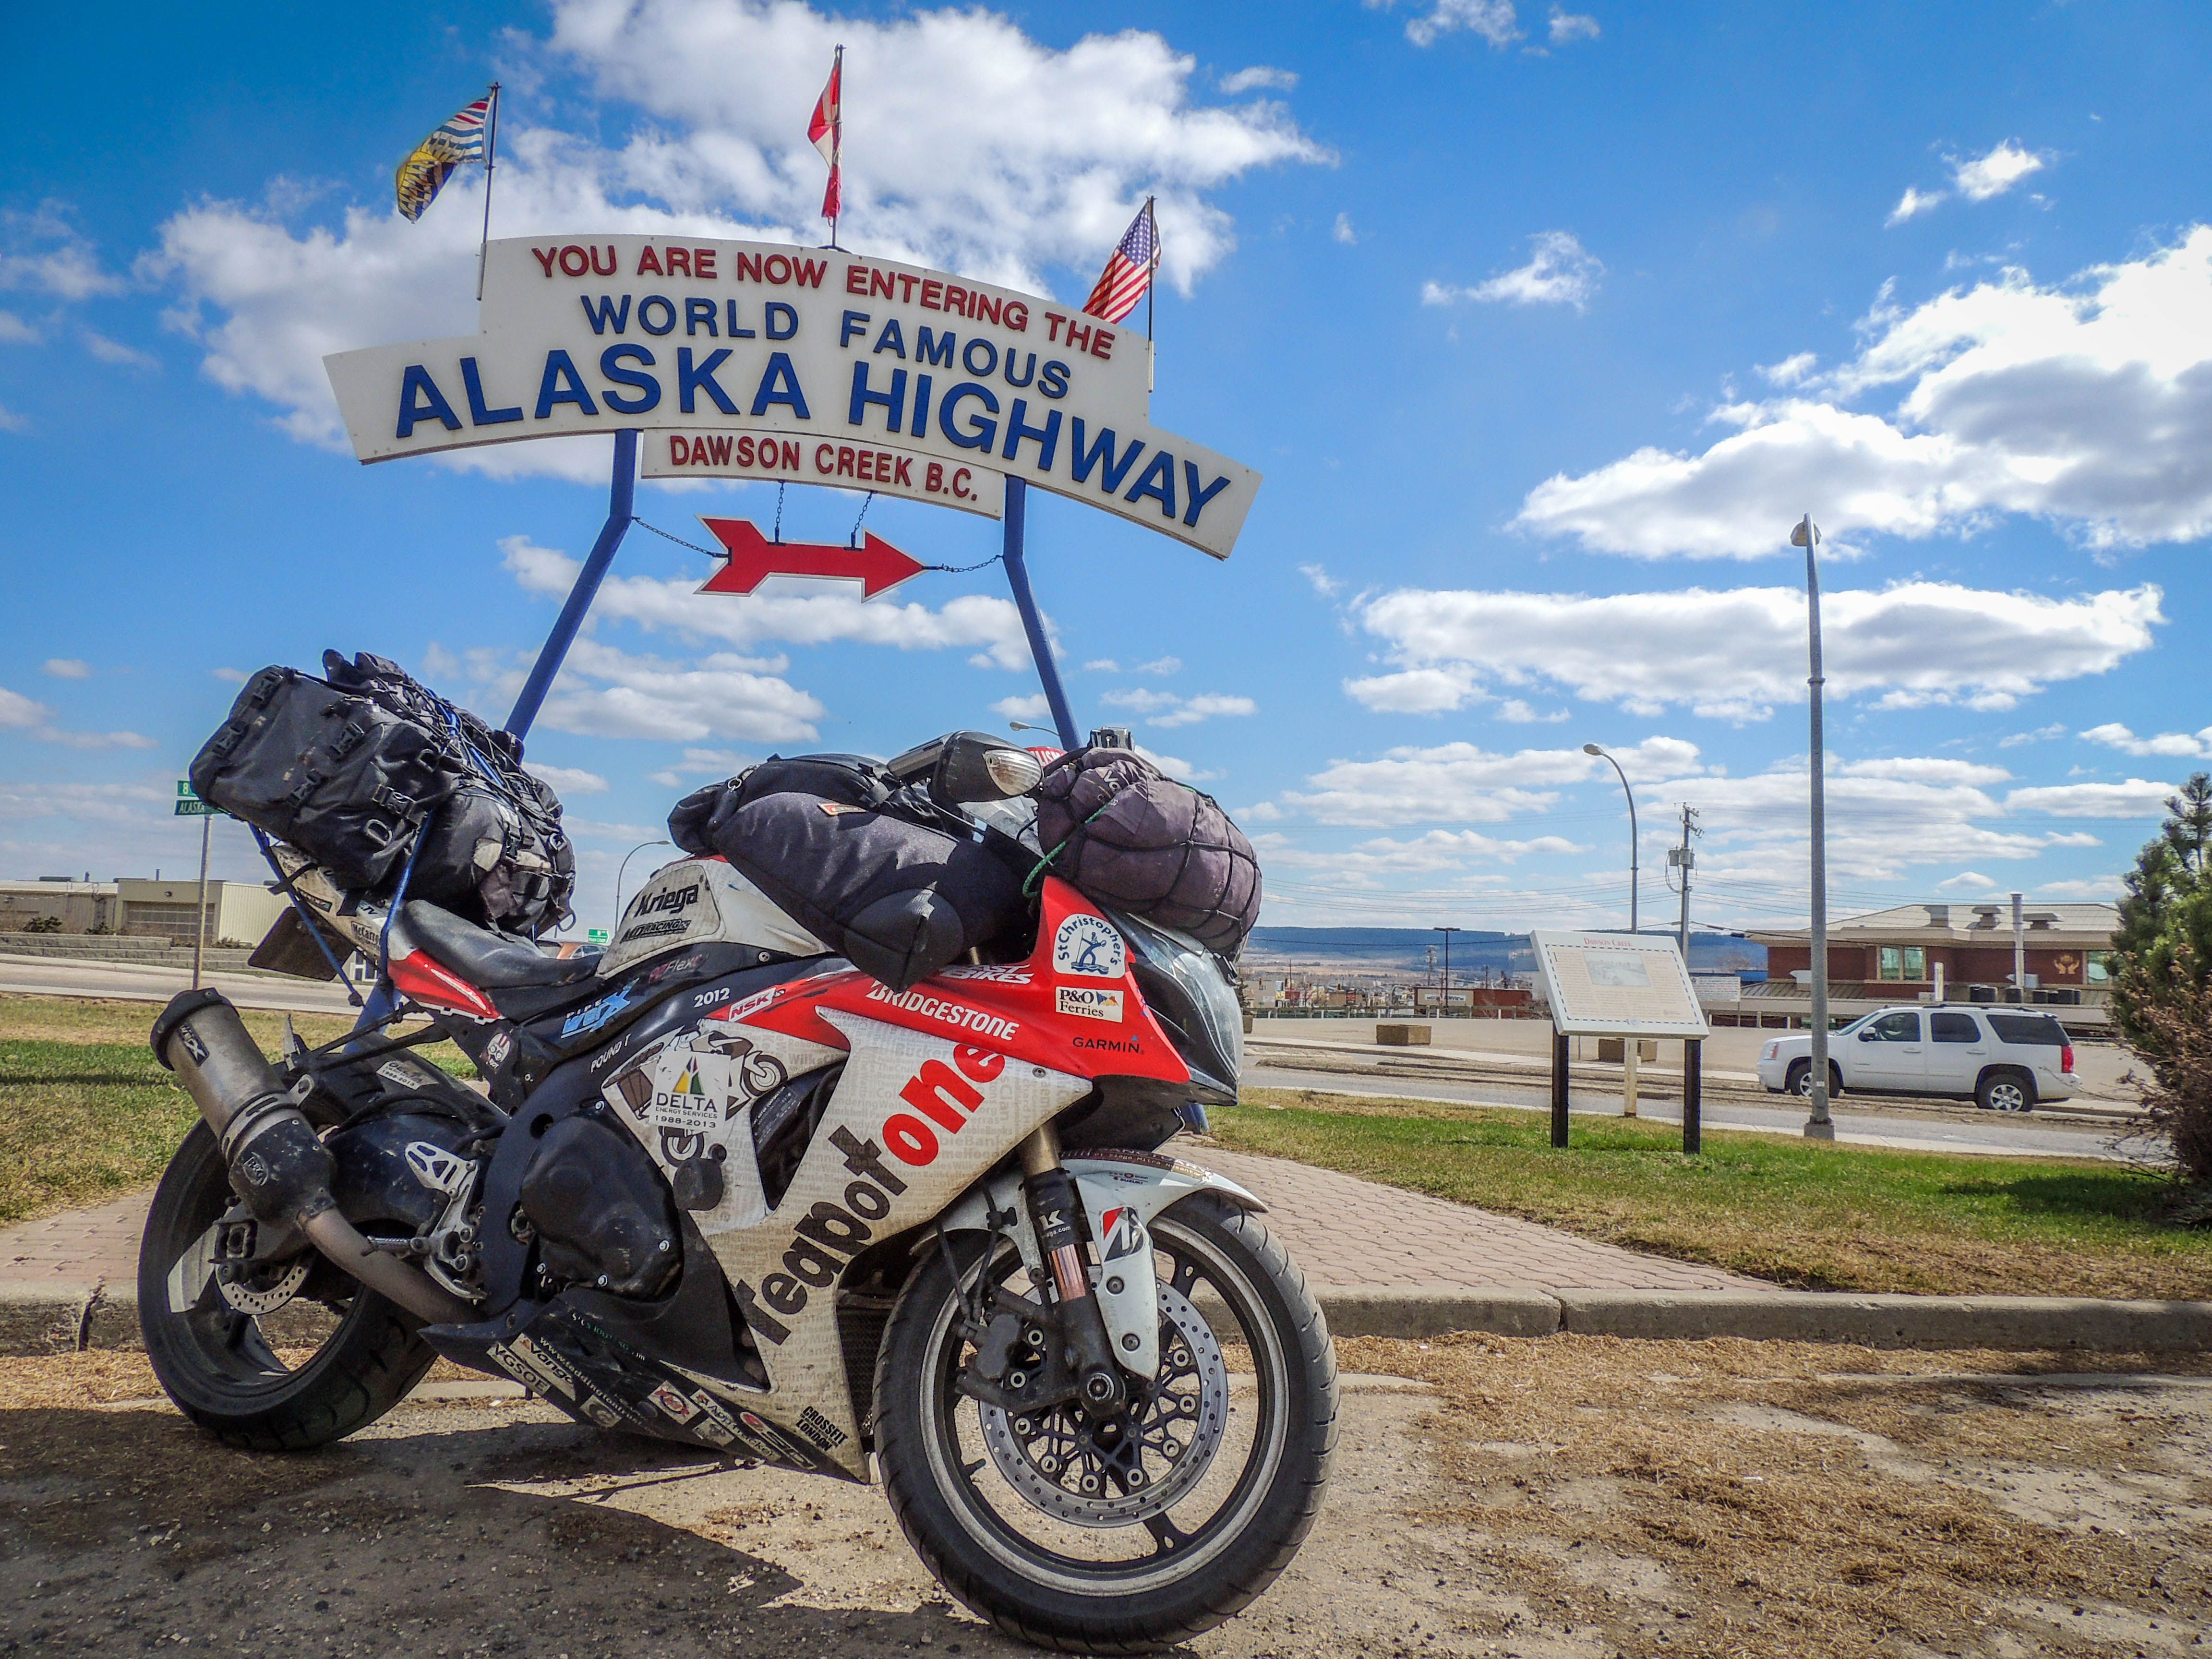 Bruce Smart TeaPotOne in his garage with GSX-R1000 on Alaska Highway